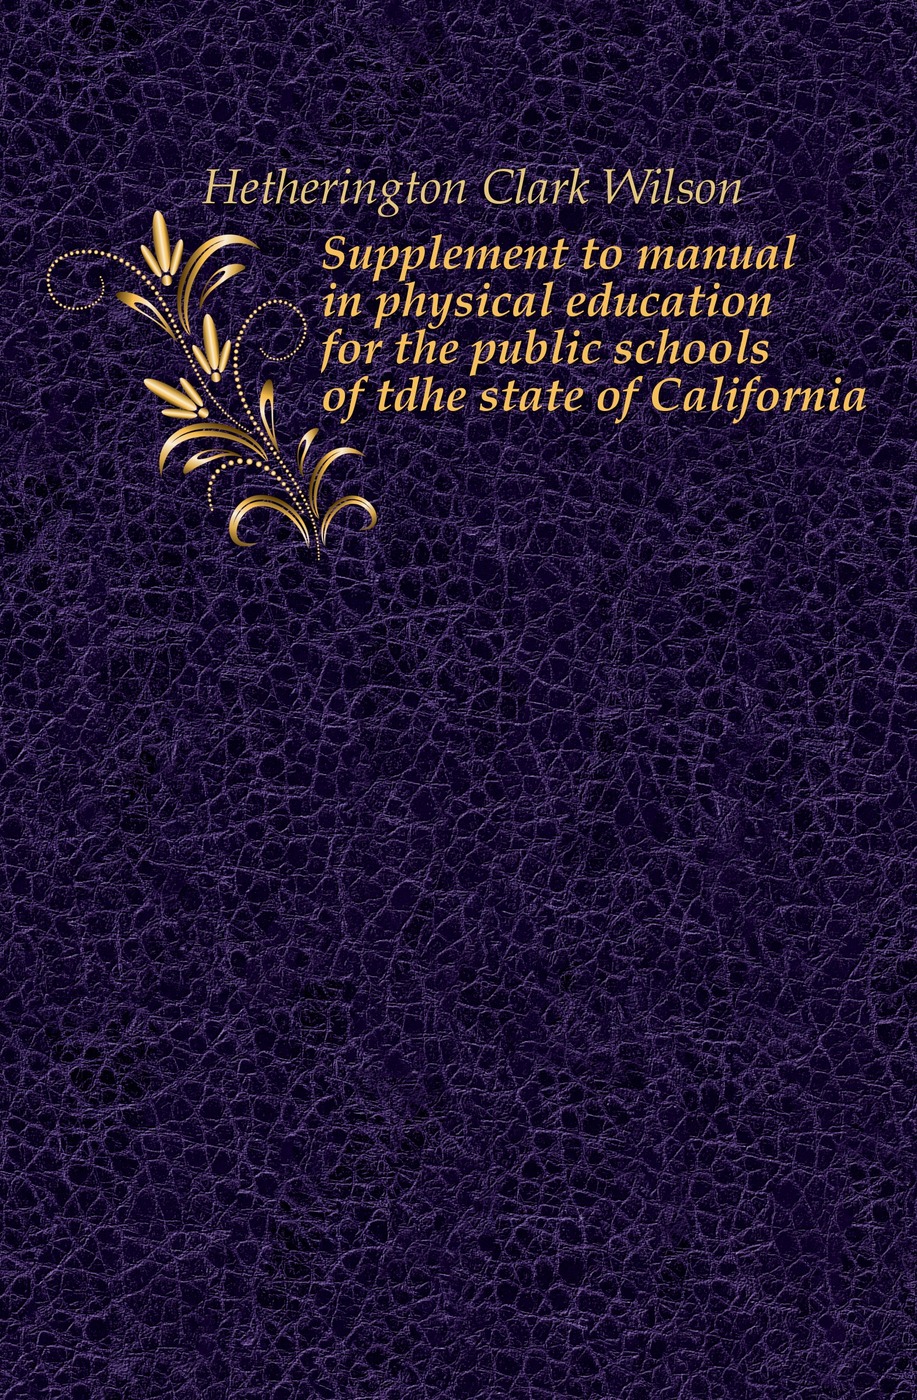 Supplement to manual in physical education for the public schools of tdhe state of California